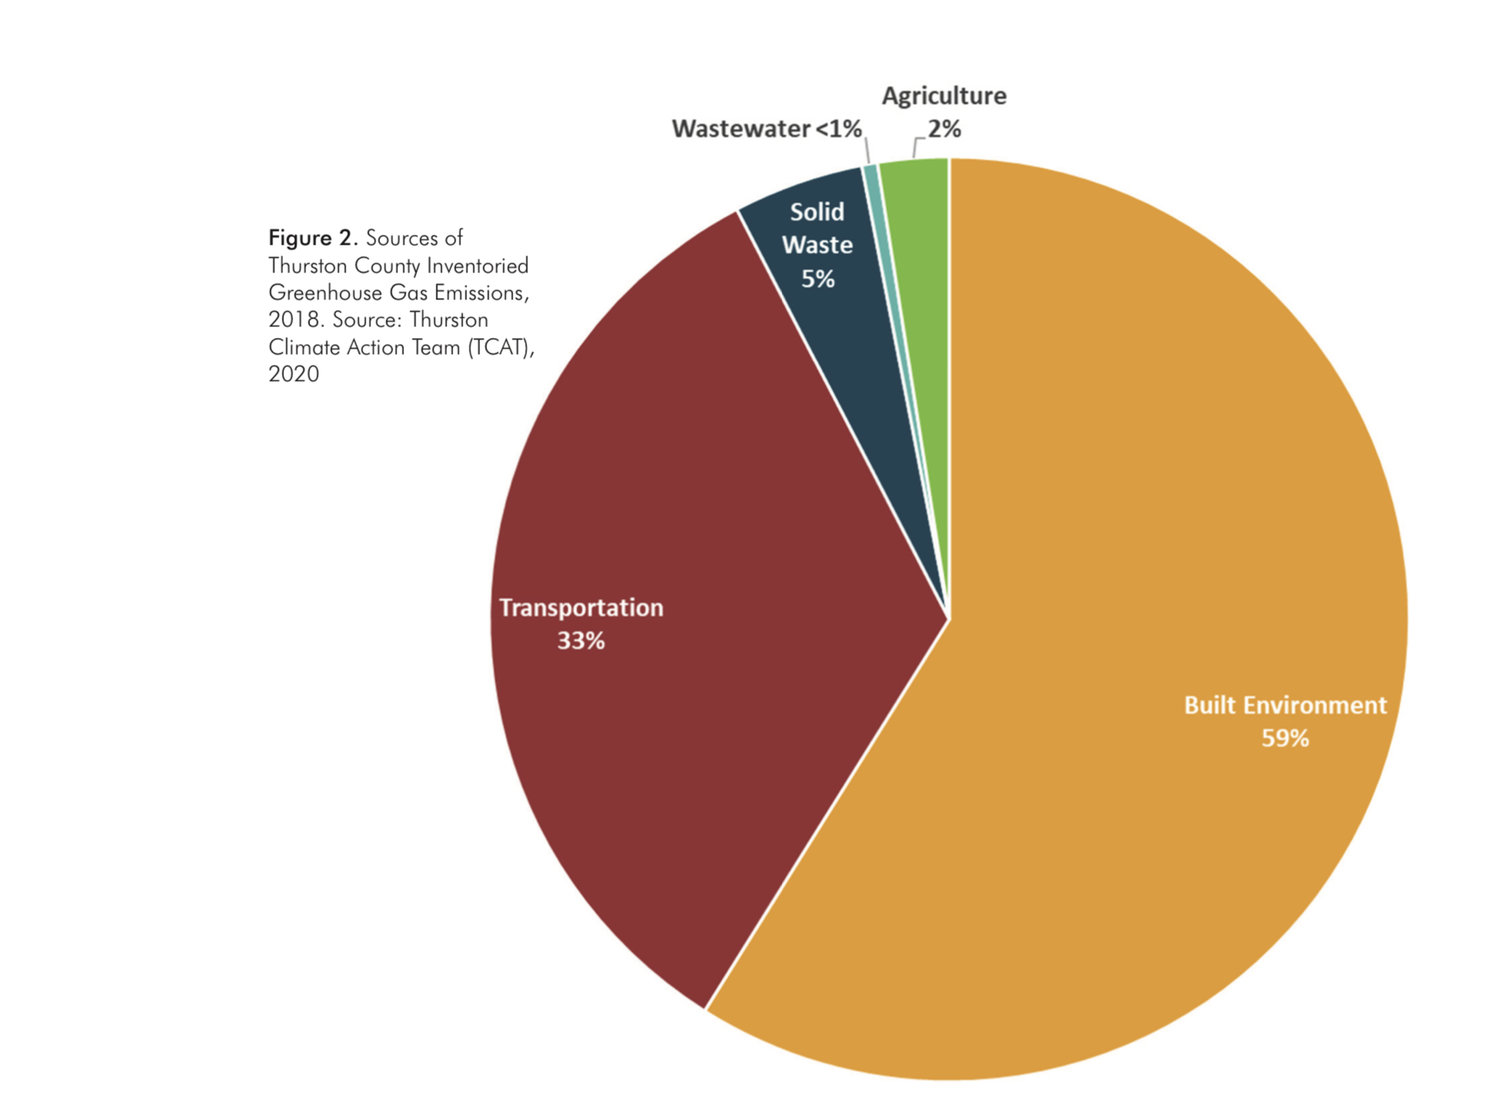 Sources of Thurston County inventoried greenhouse gas emissions in 2018.